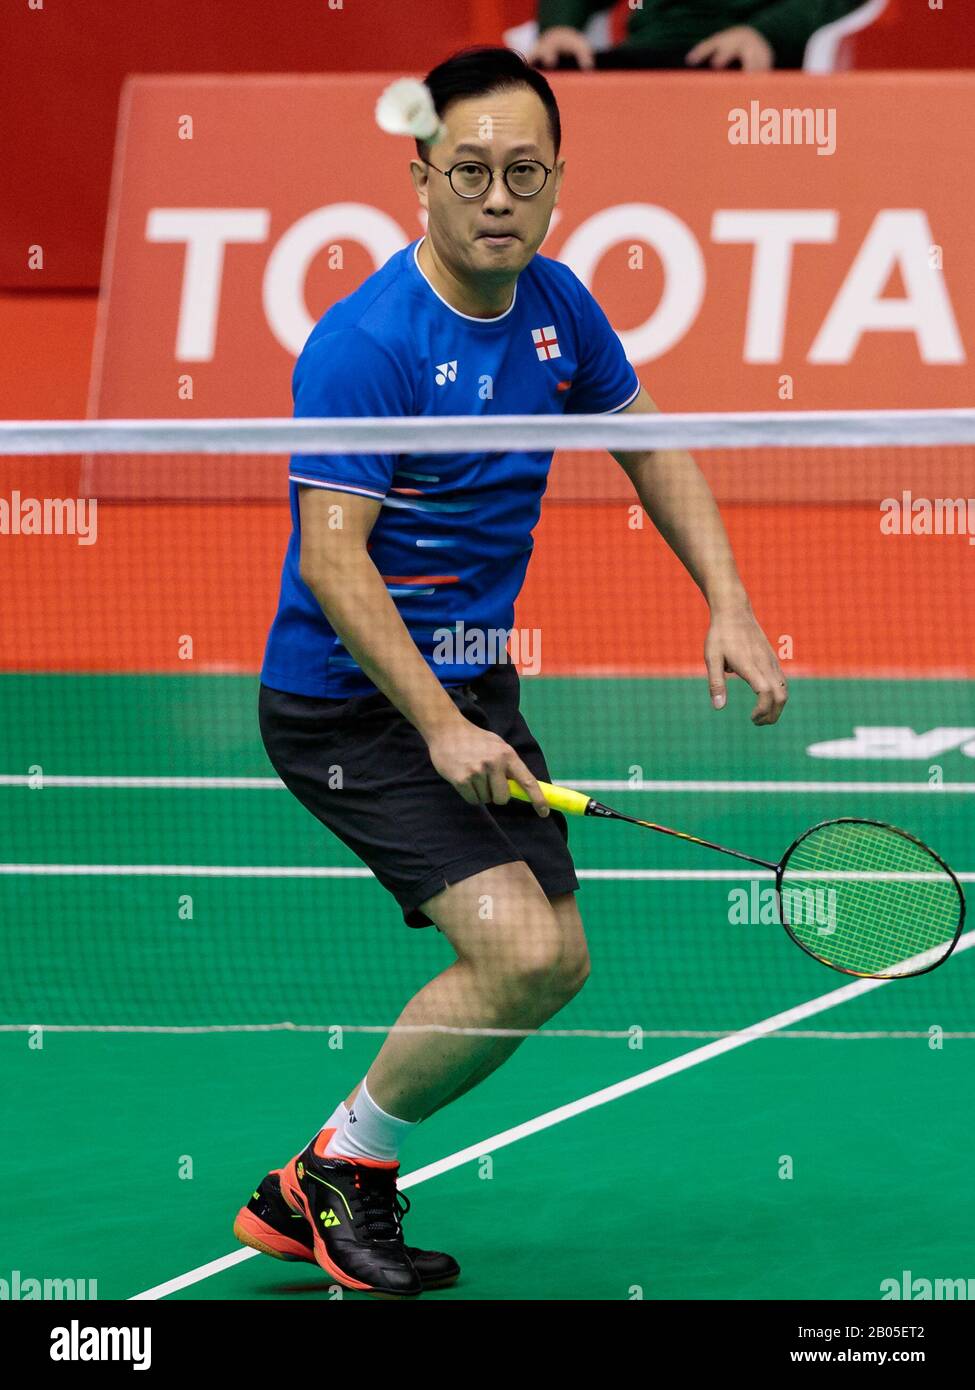 Kar Lung Chung of England competes in the Mens Singles qualification Round 2 match against Jacob Nilsson of Sweden on day one of the Barcelona Spain Master at Vall dHebron Olympic Sports